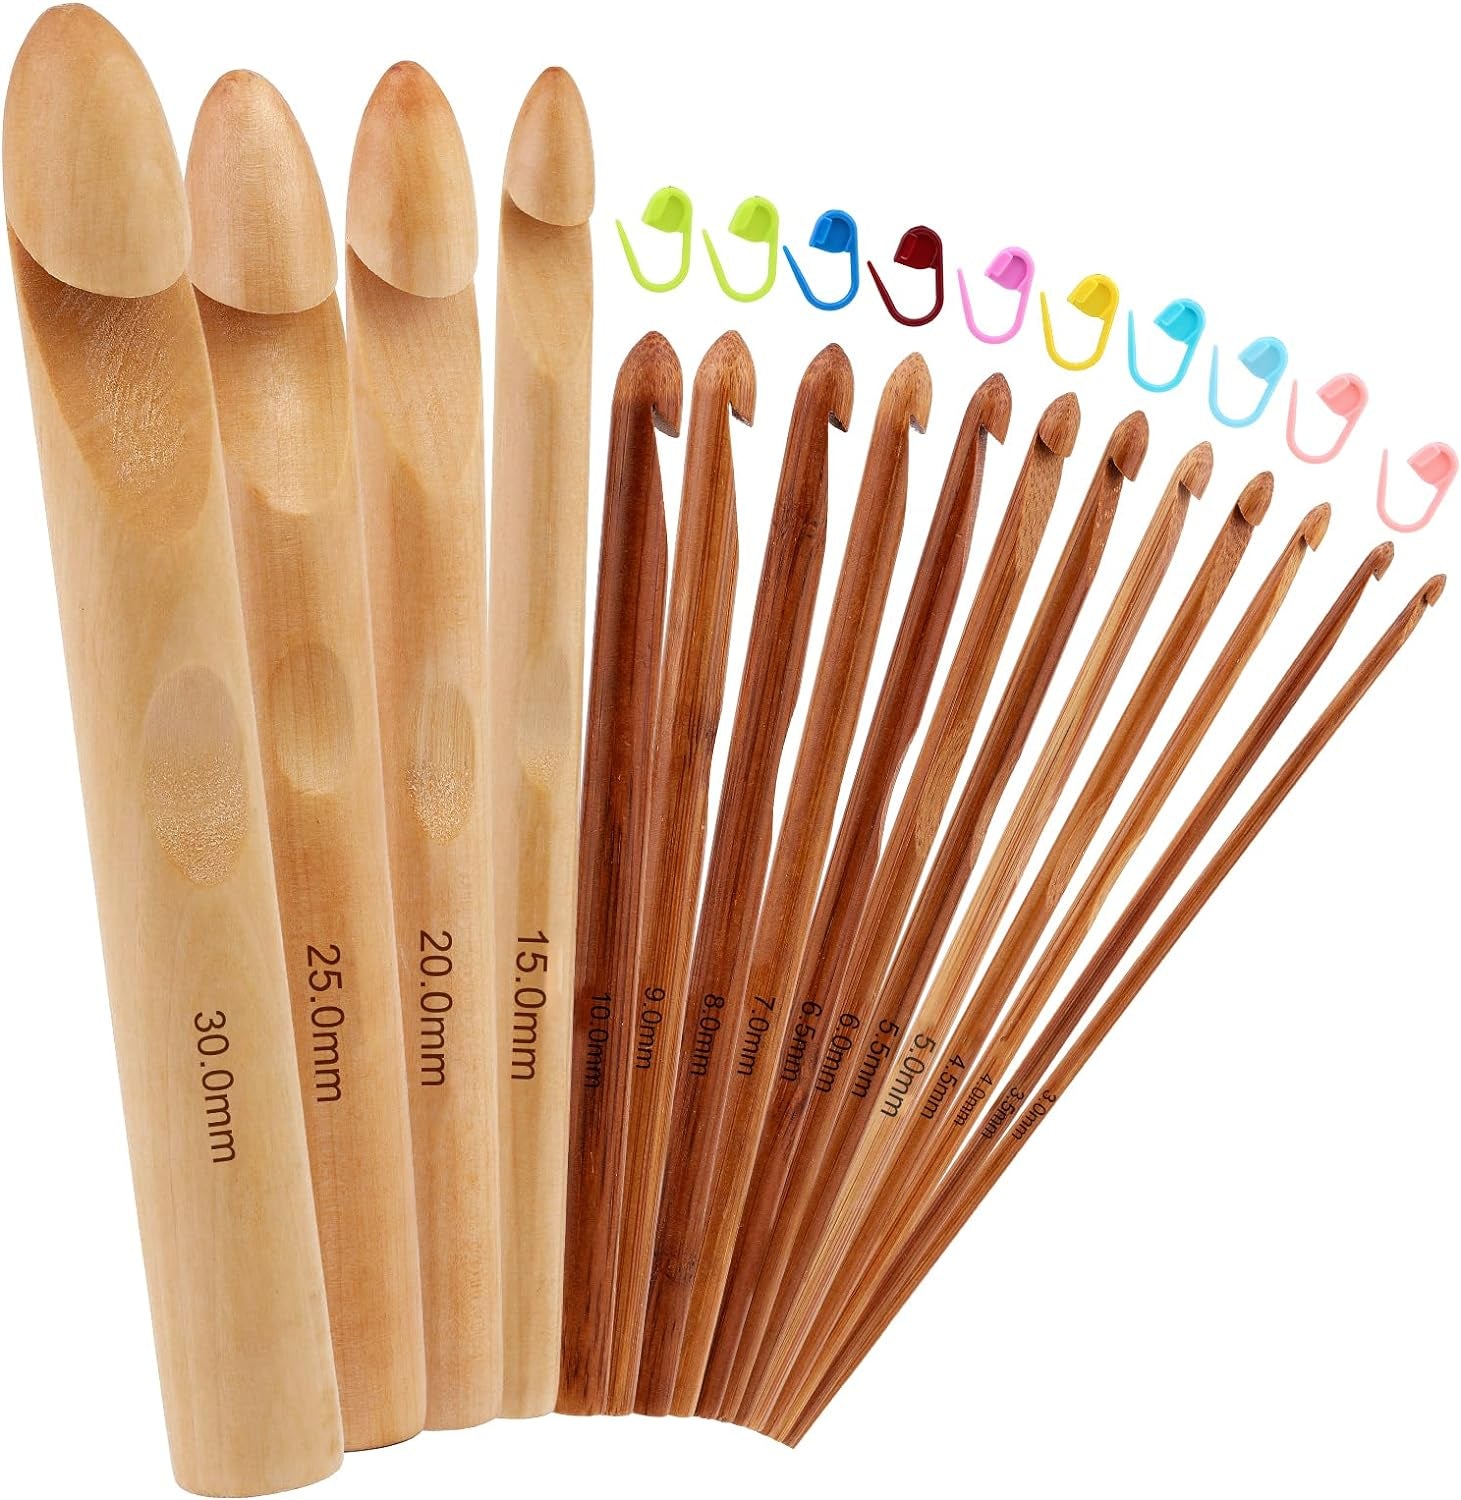 16 Pieces Wooden Crochet Hooks, 3 to 30 Mm in Diameters Handle Crochet Hook Knitting Crochet Needles with 10 Pcs Knitting Stitch Markers for Handcraft Crocheting